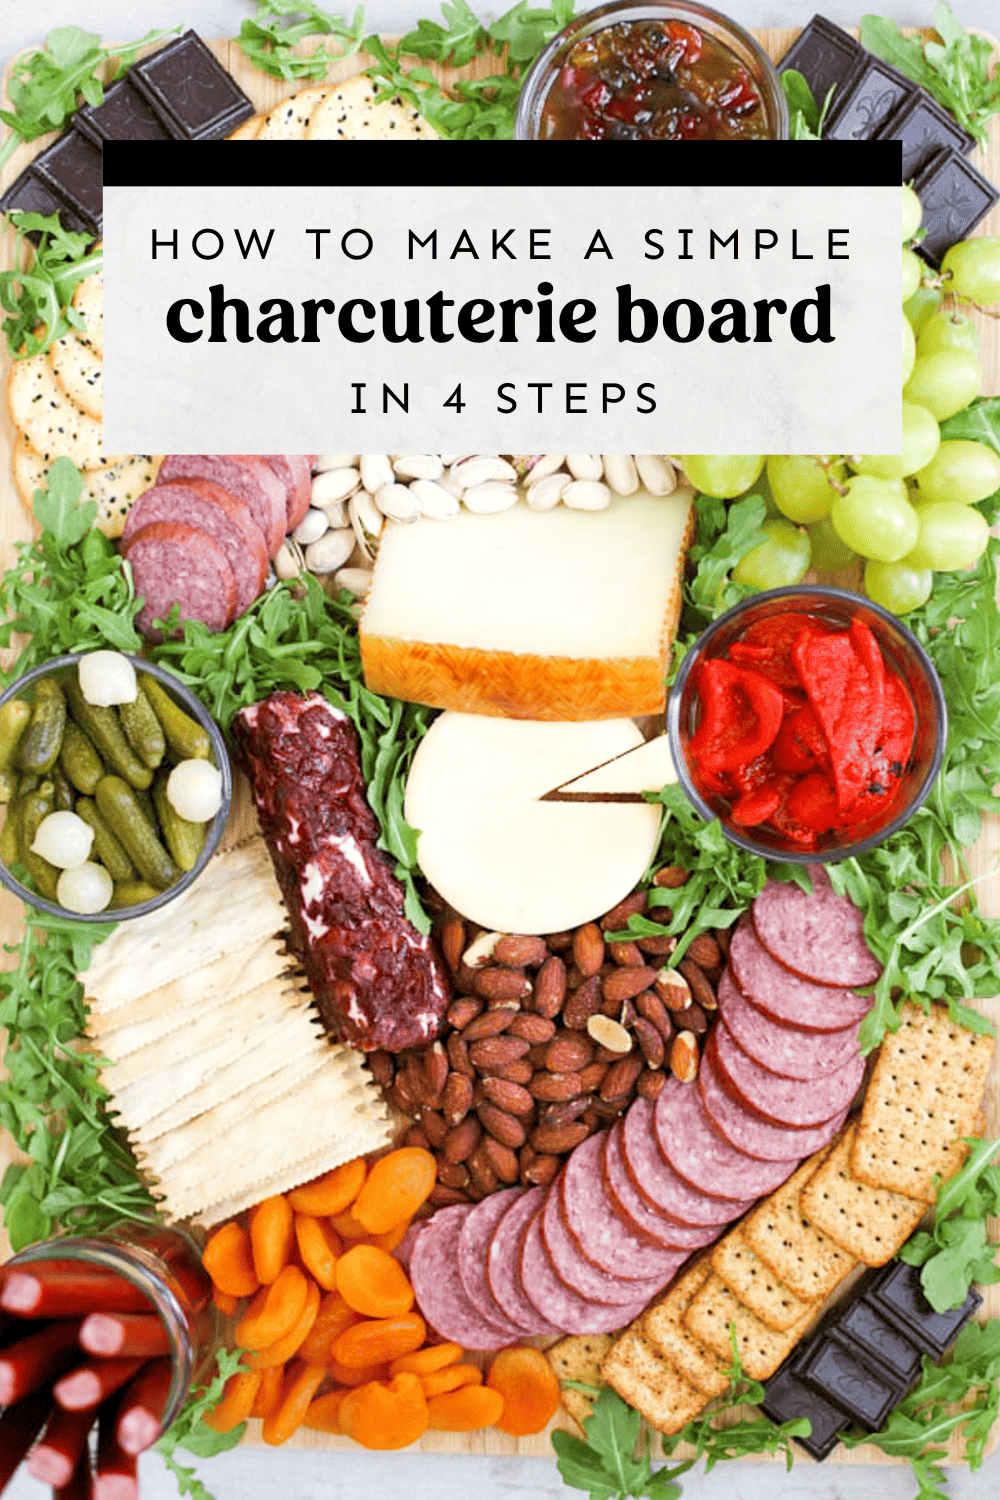 Overhead shot of a charcuterie board filled with meats, cheeses, veggies, and more.